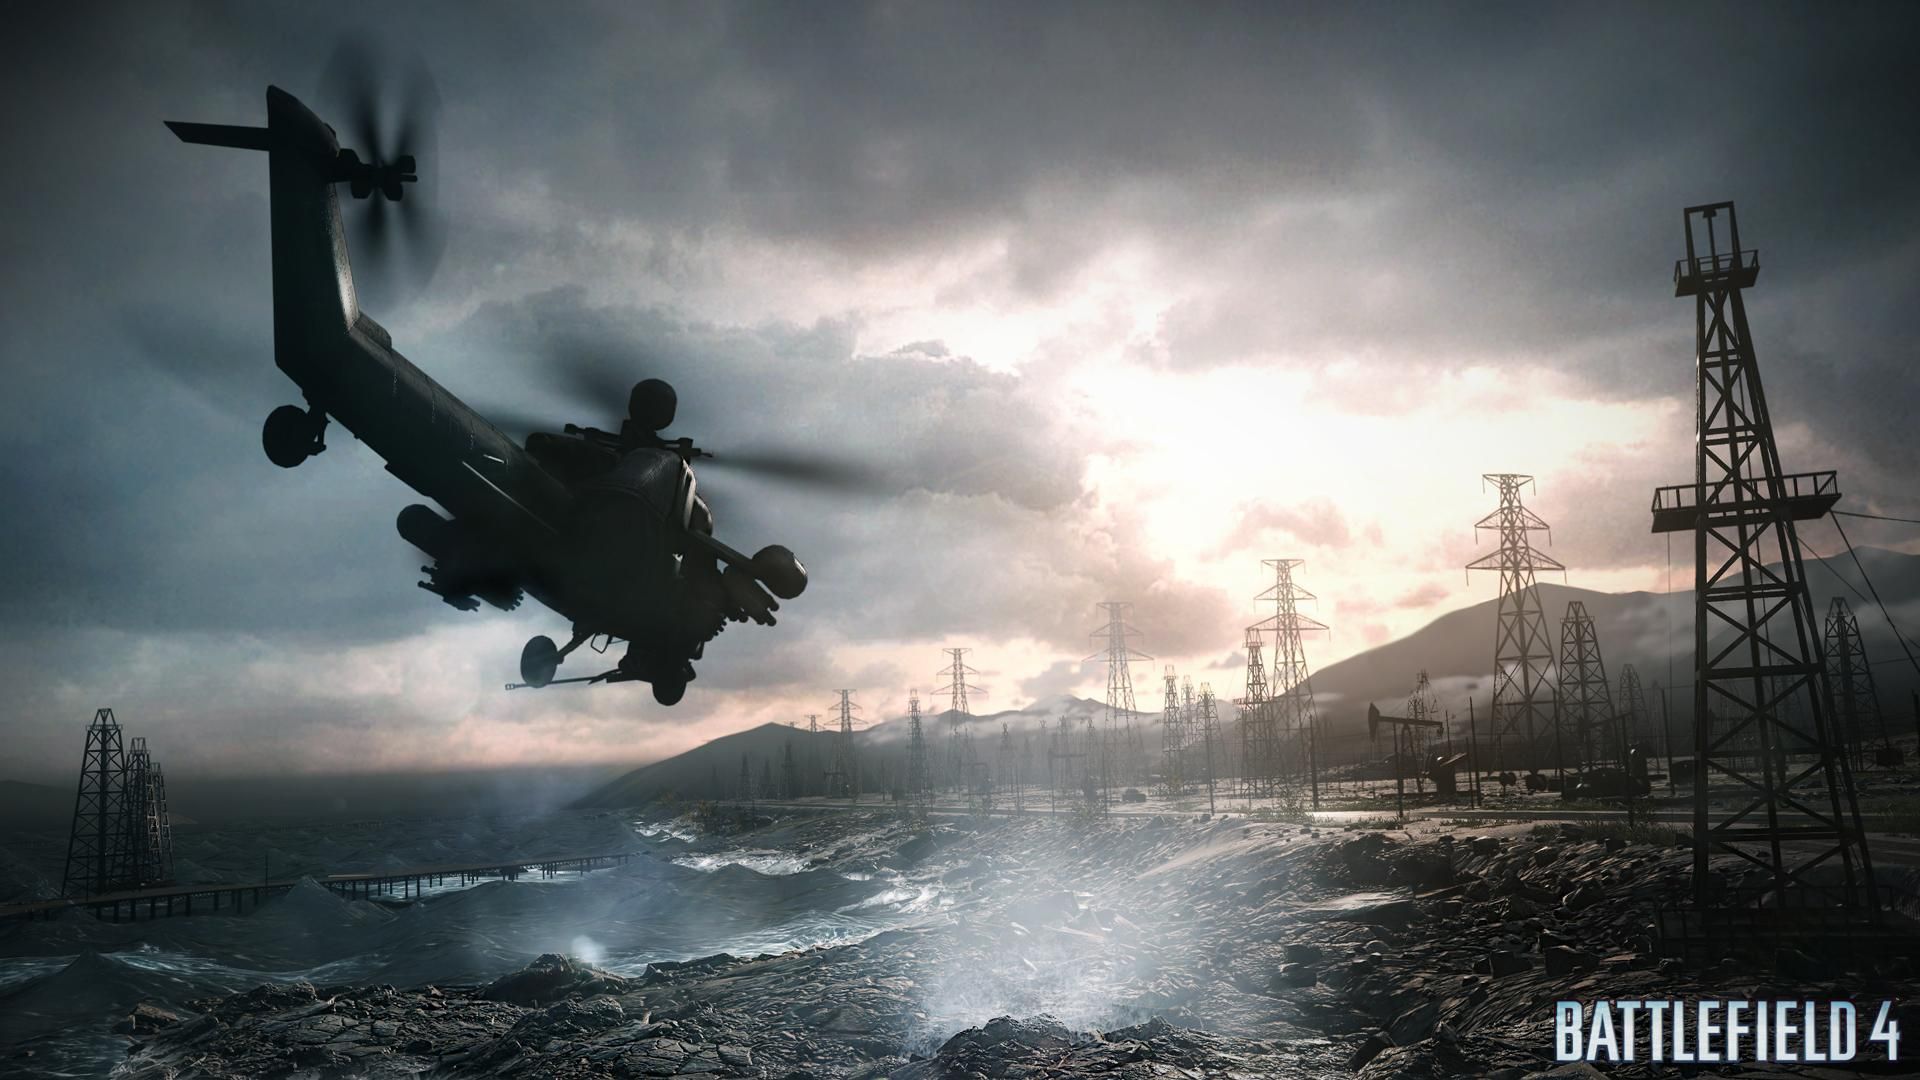 Here are a few Battlefield 4 HD wallpapers for your desktop 1920x1080